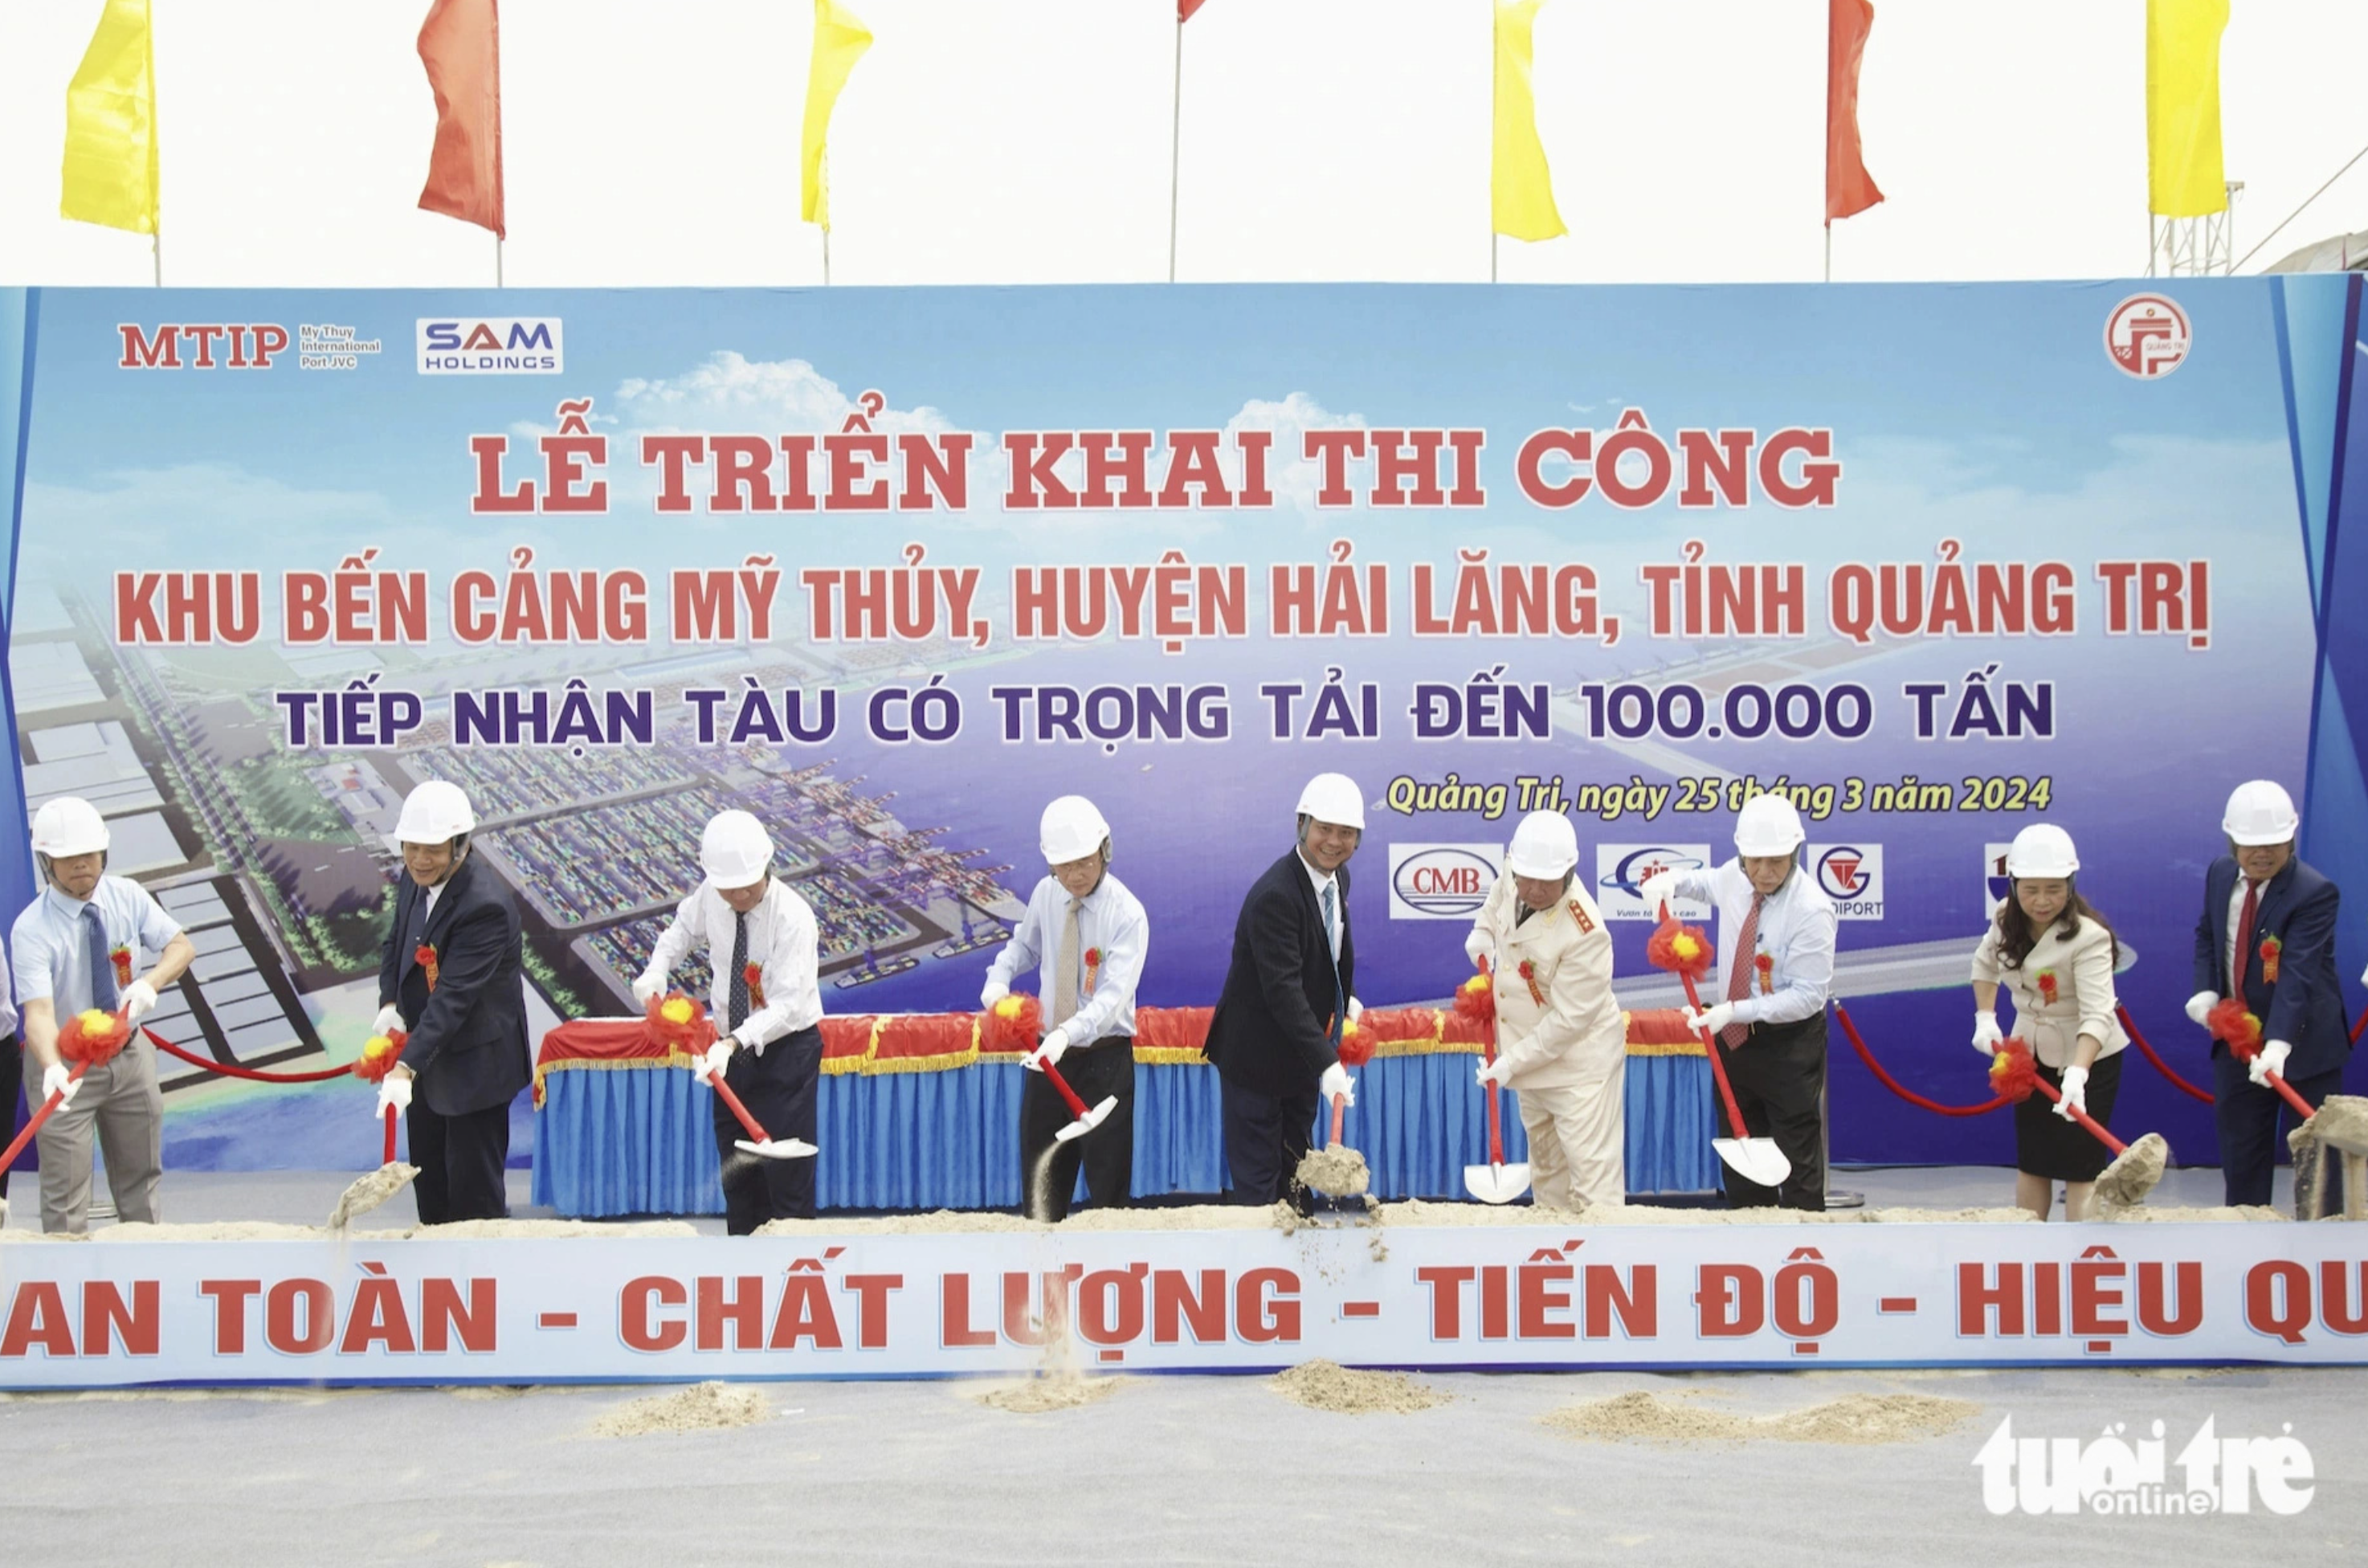 Work starts on $570mn seaport in Vietnam’s Quang Tri